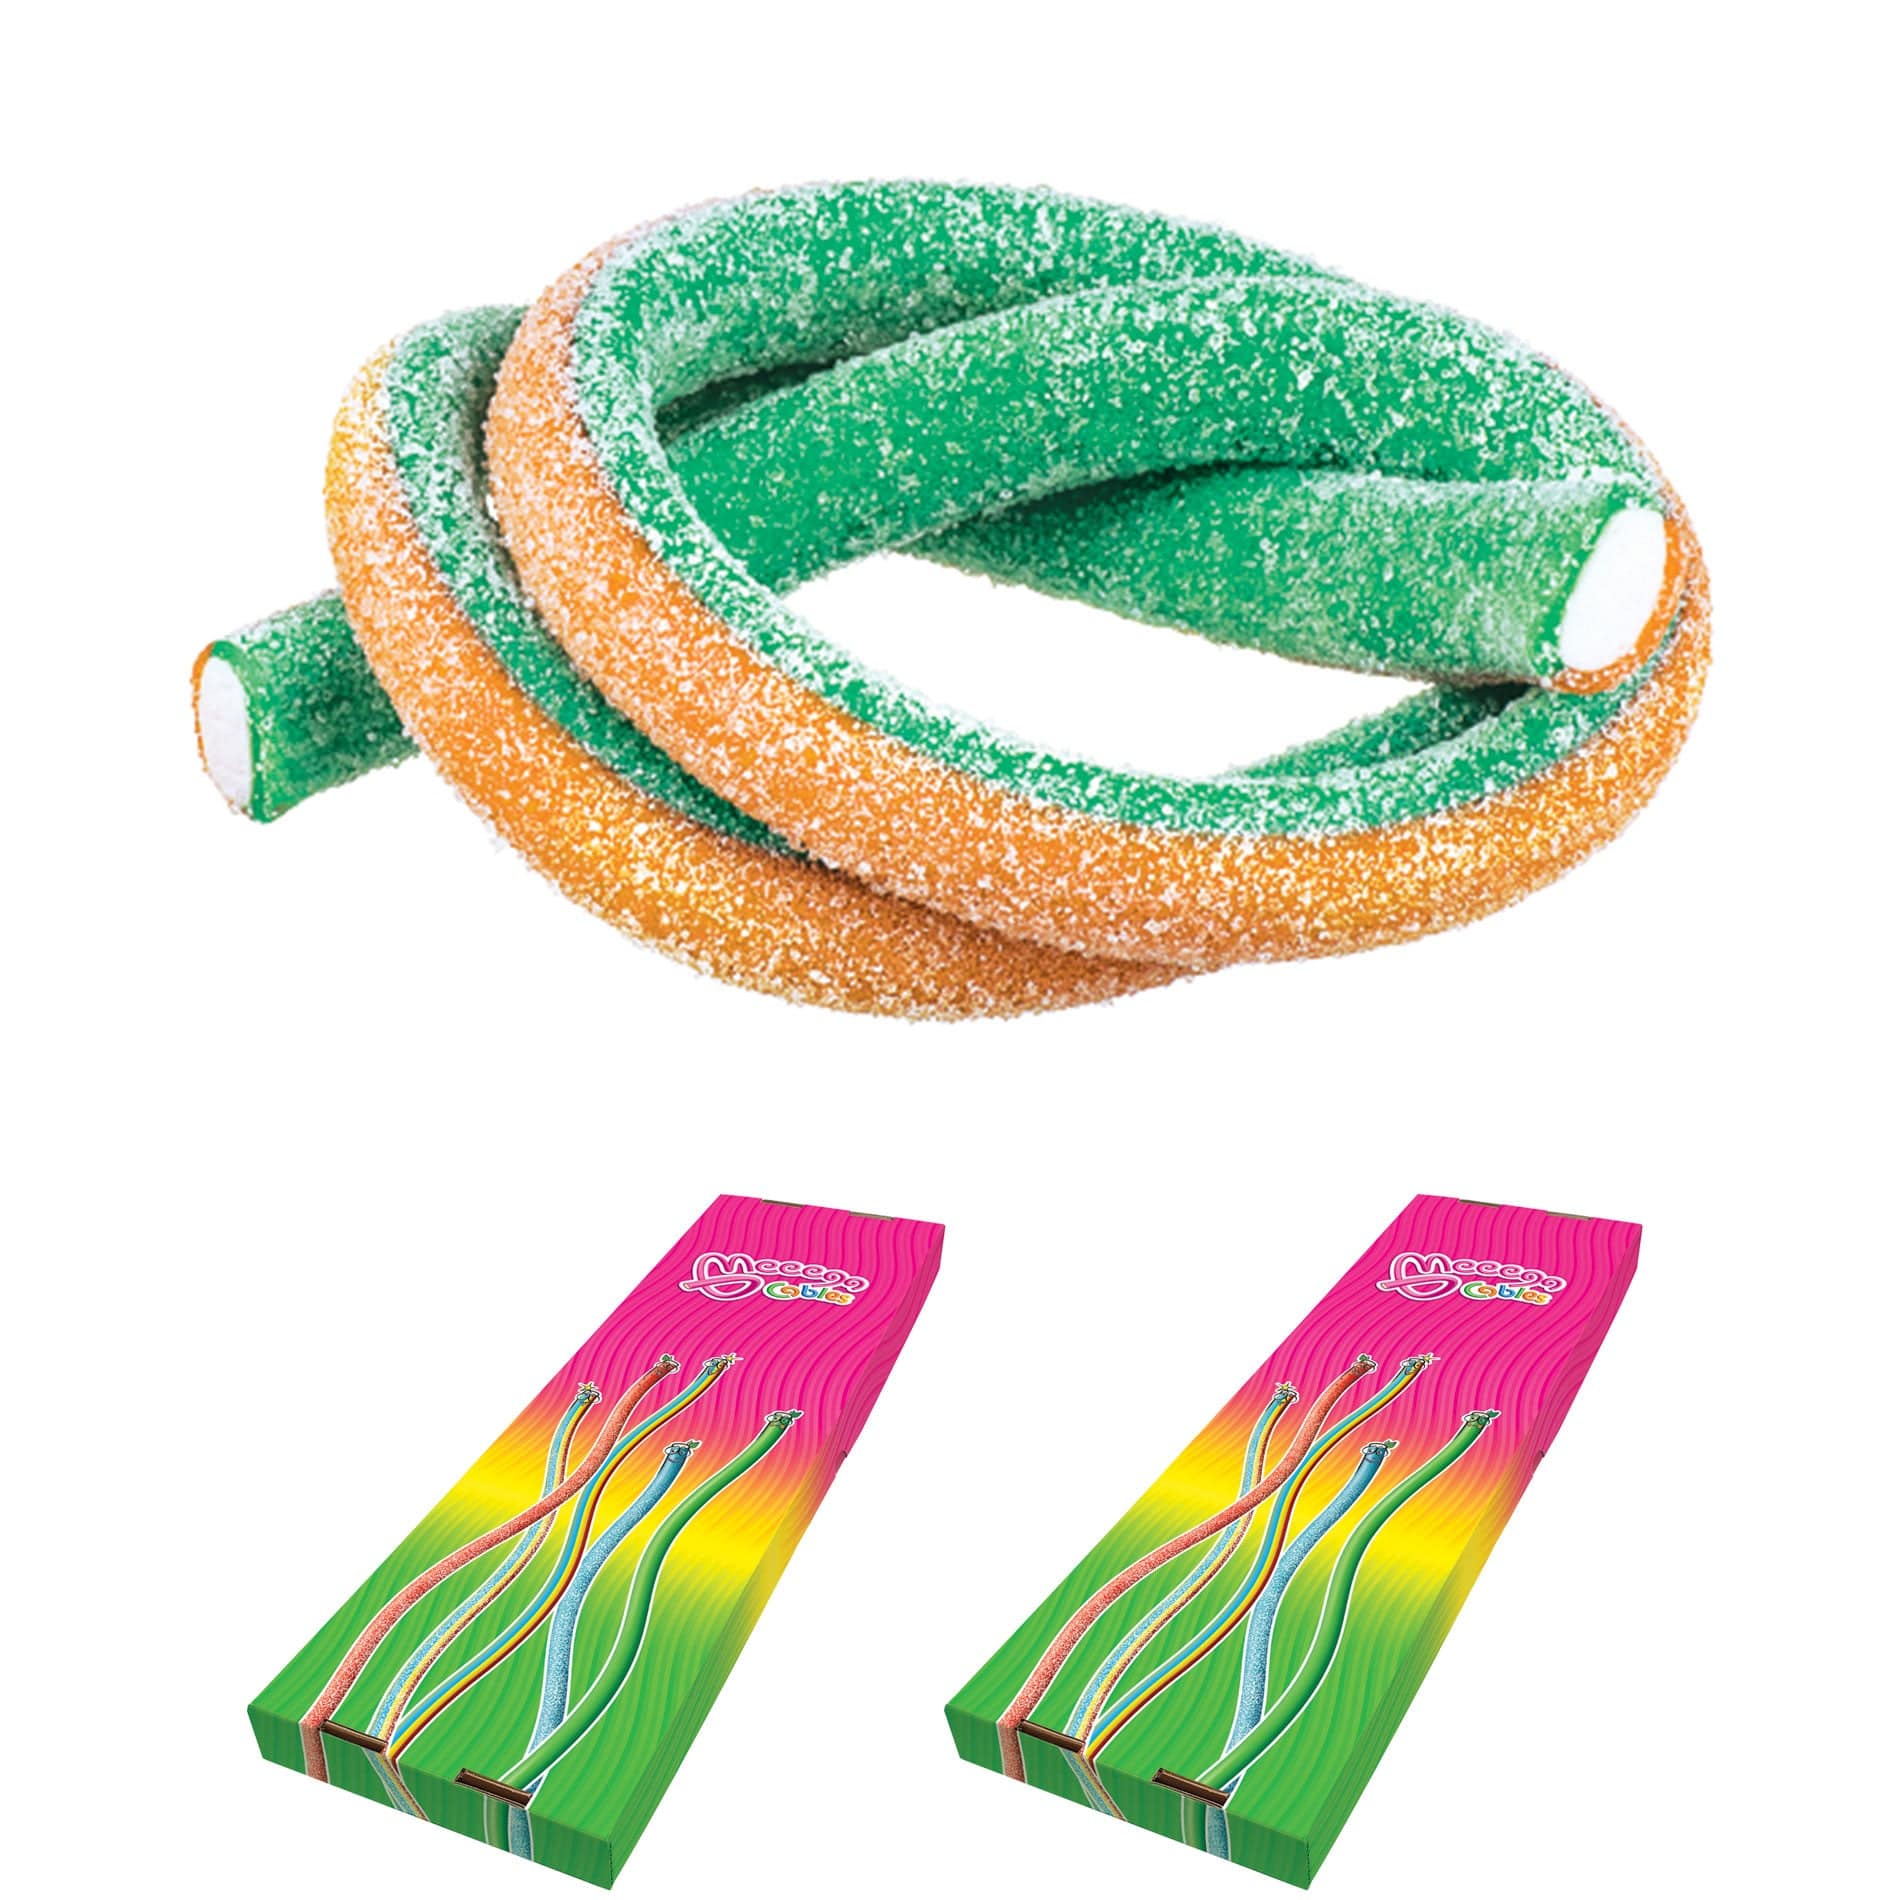 Novelty Concessions Gummy Rope SOUR ORANGE LIME / 2 Pack (60 pieces) Meeega Cables European Chewy Rope Candy - Box of 30 individually wrapped Meeega Cables, each over 2-feet long cups with lids and straws